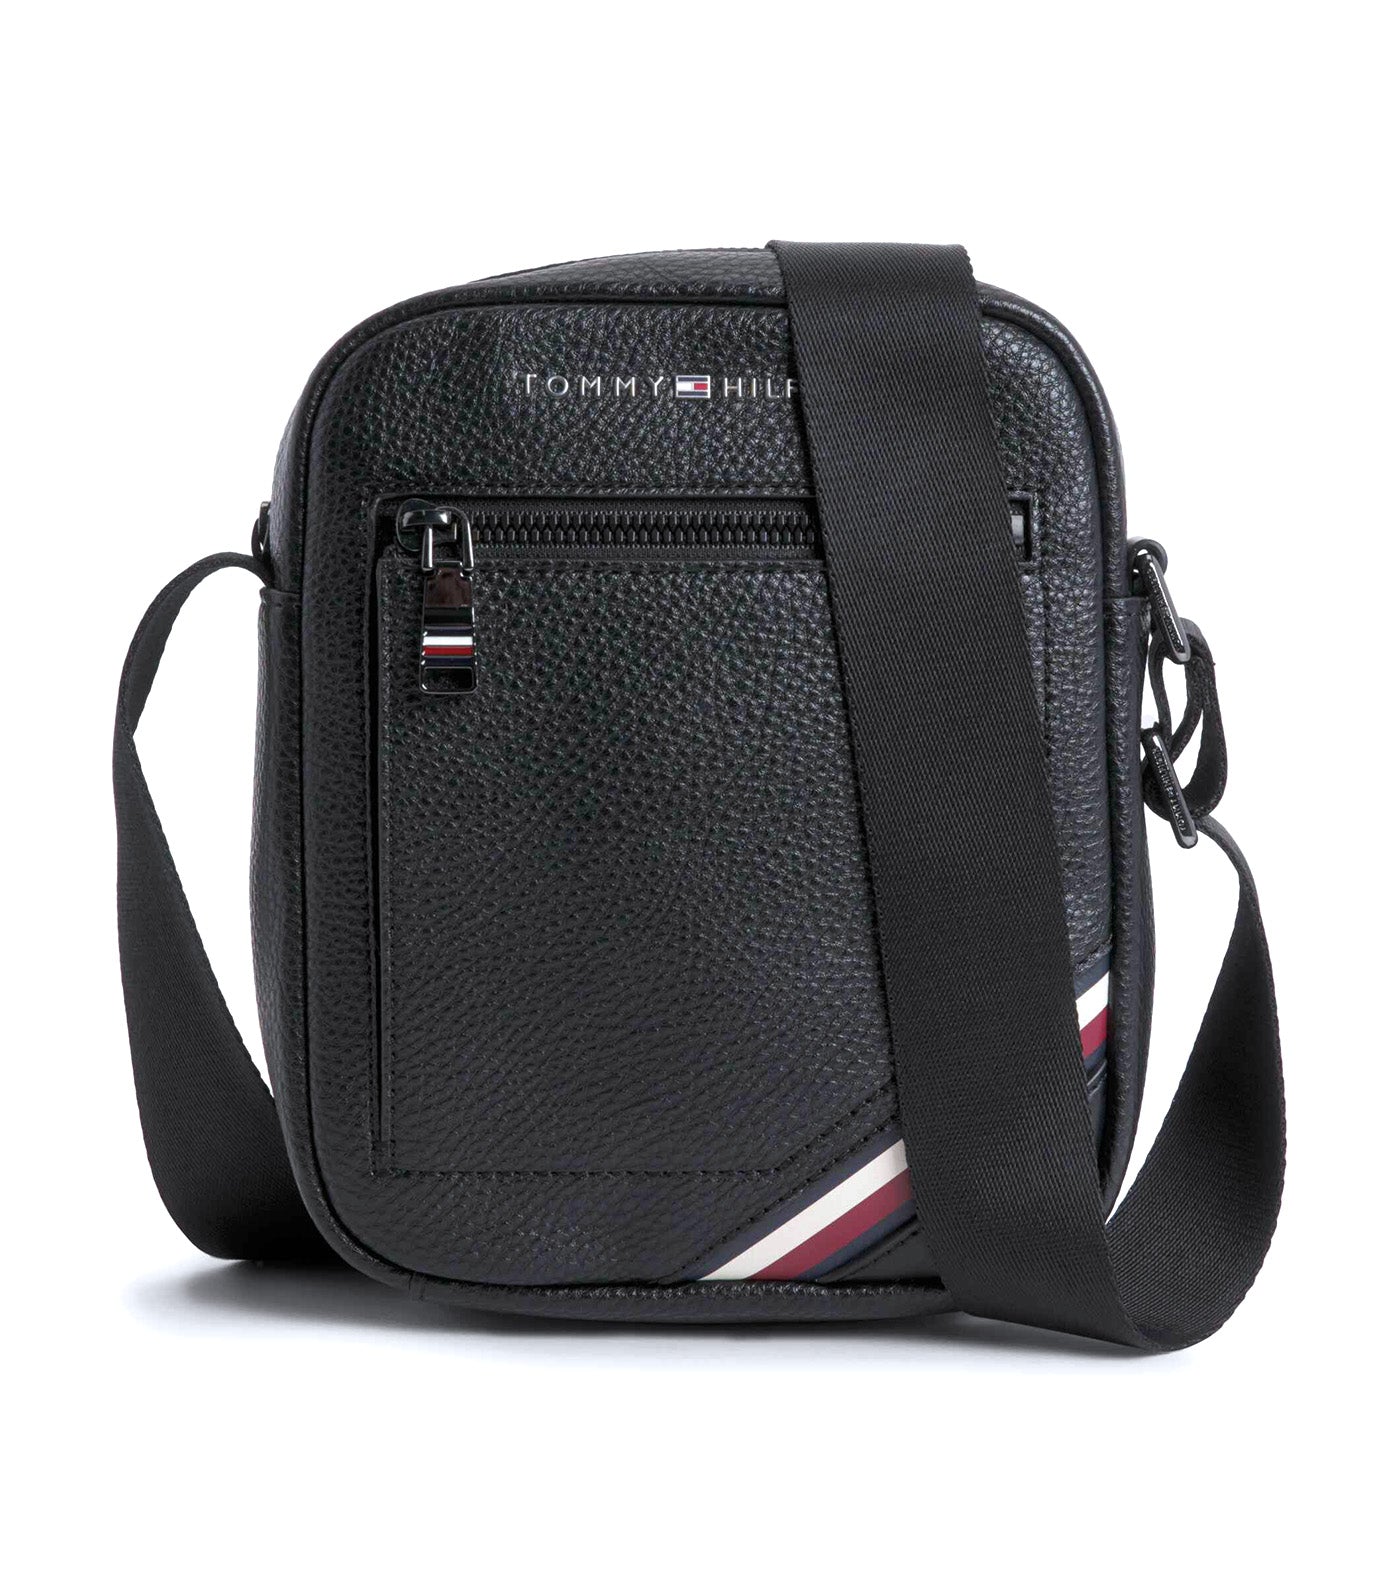 Buy Manfrotto Windsor Reporter RP Camera Bag online from Sharp Imaging